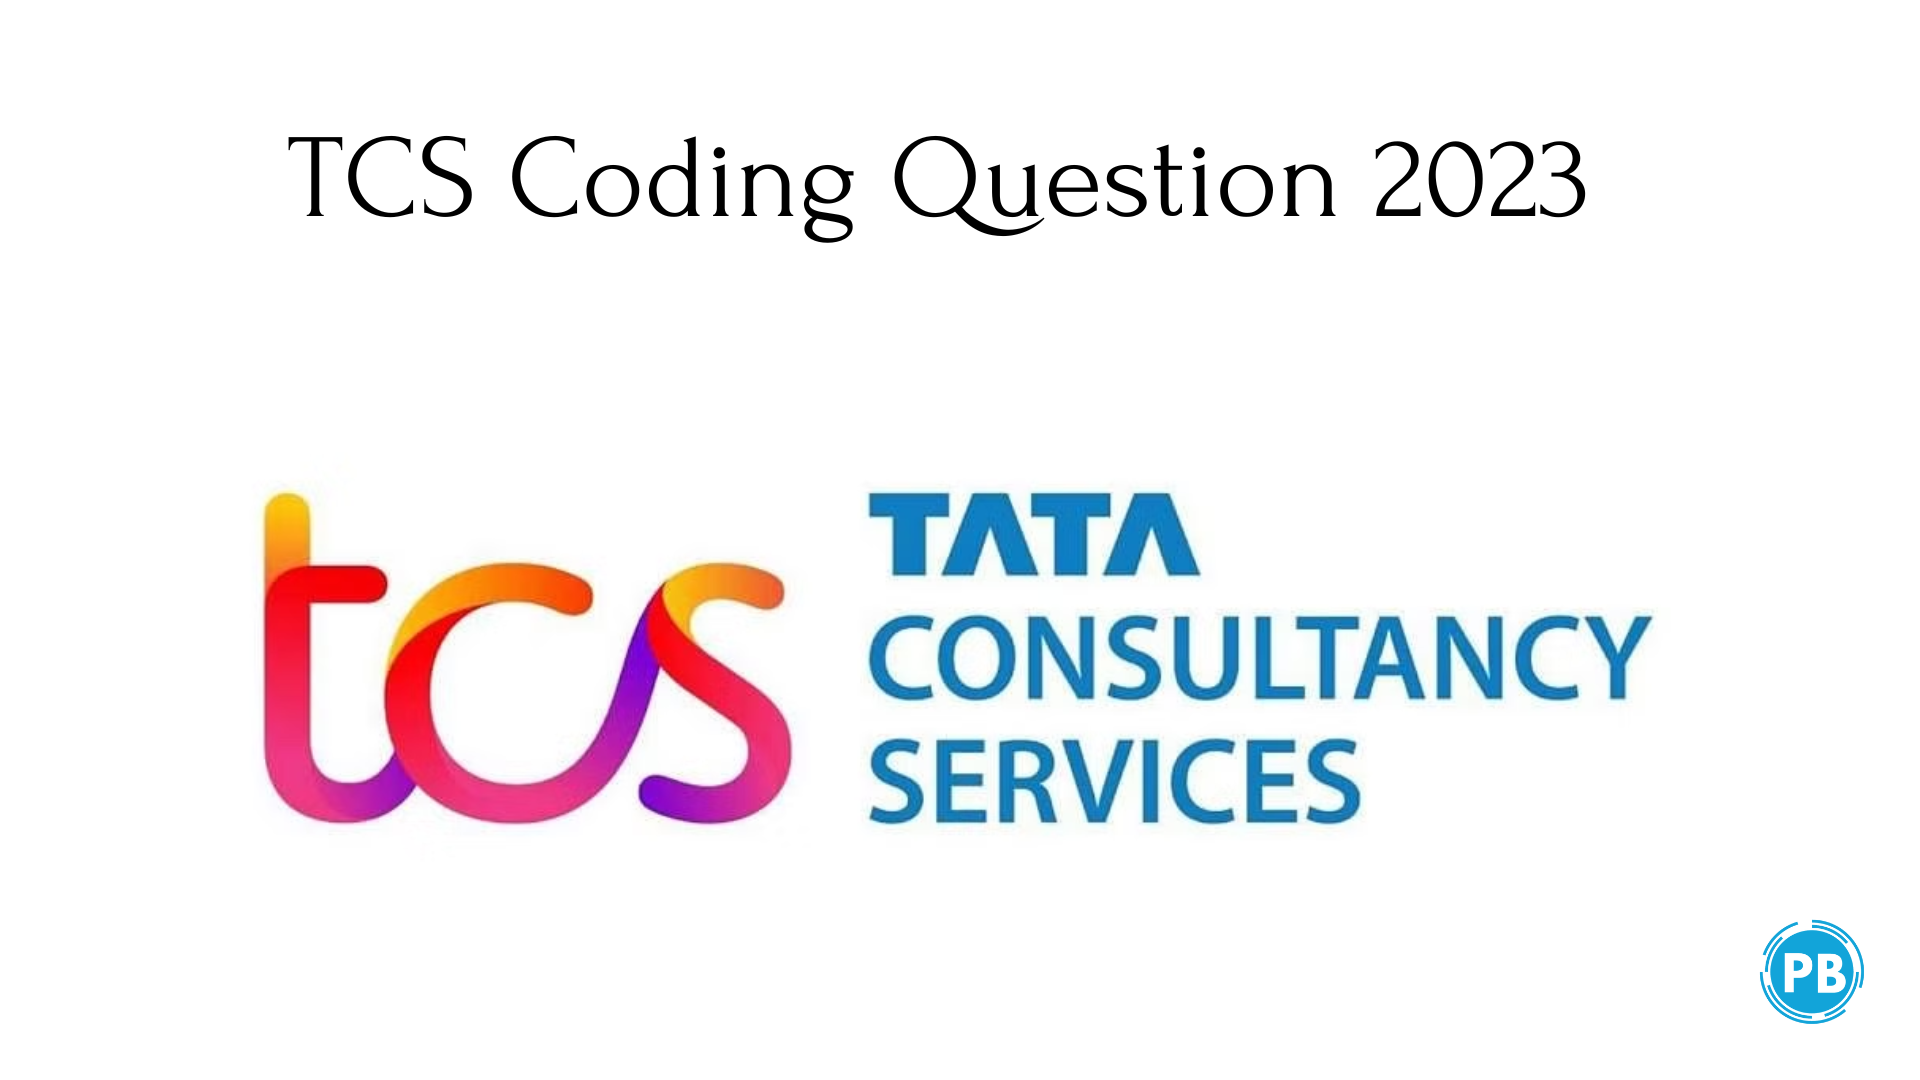 TCS Coding Questions & Solution 2023